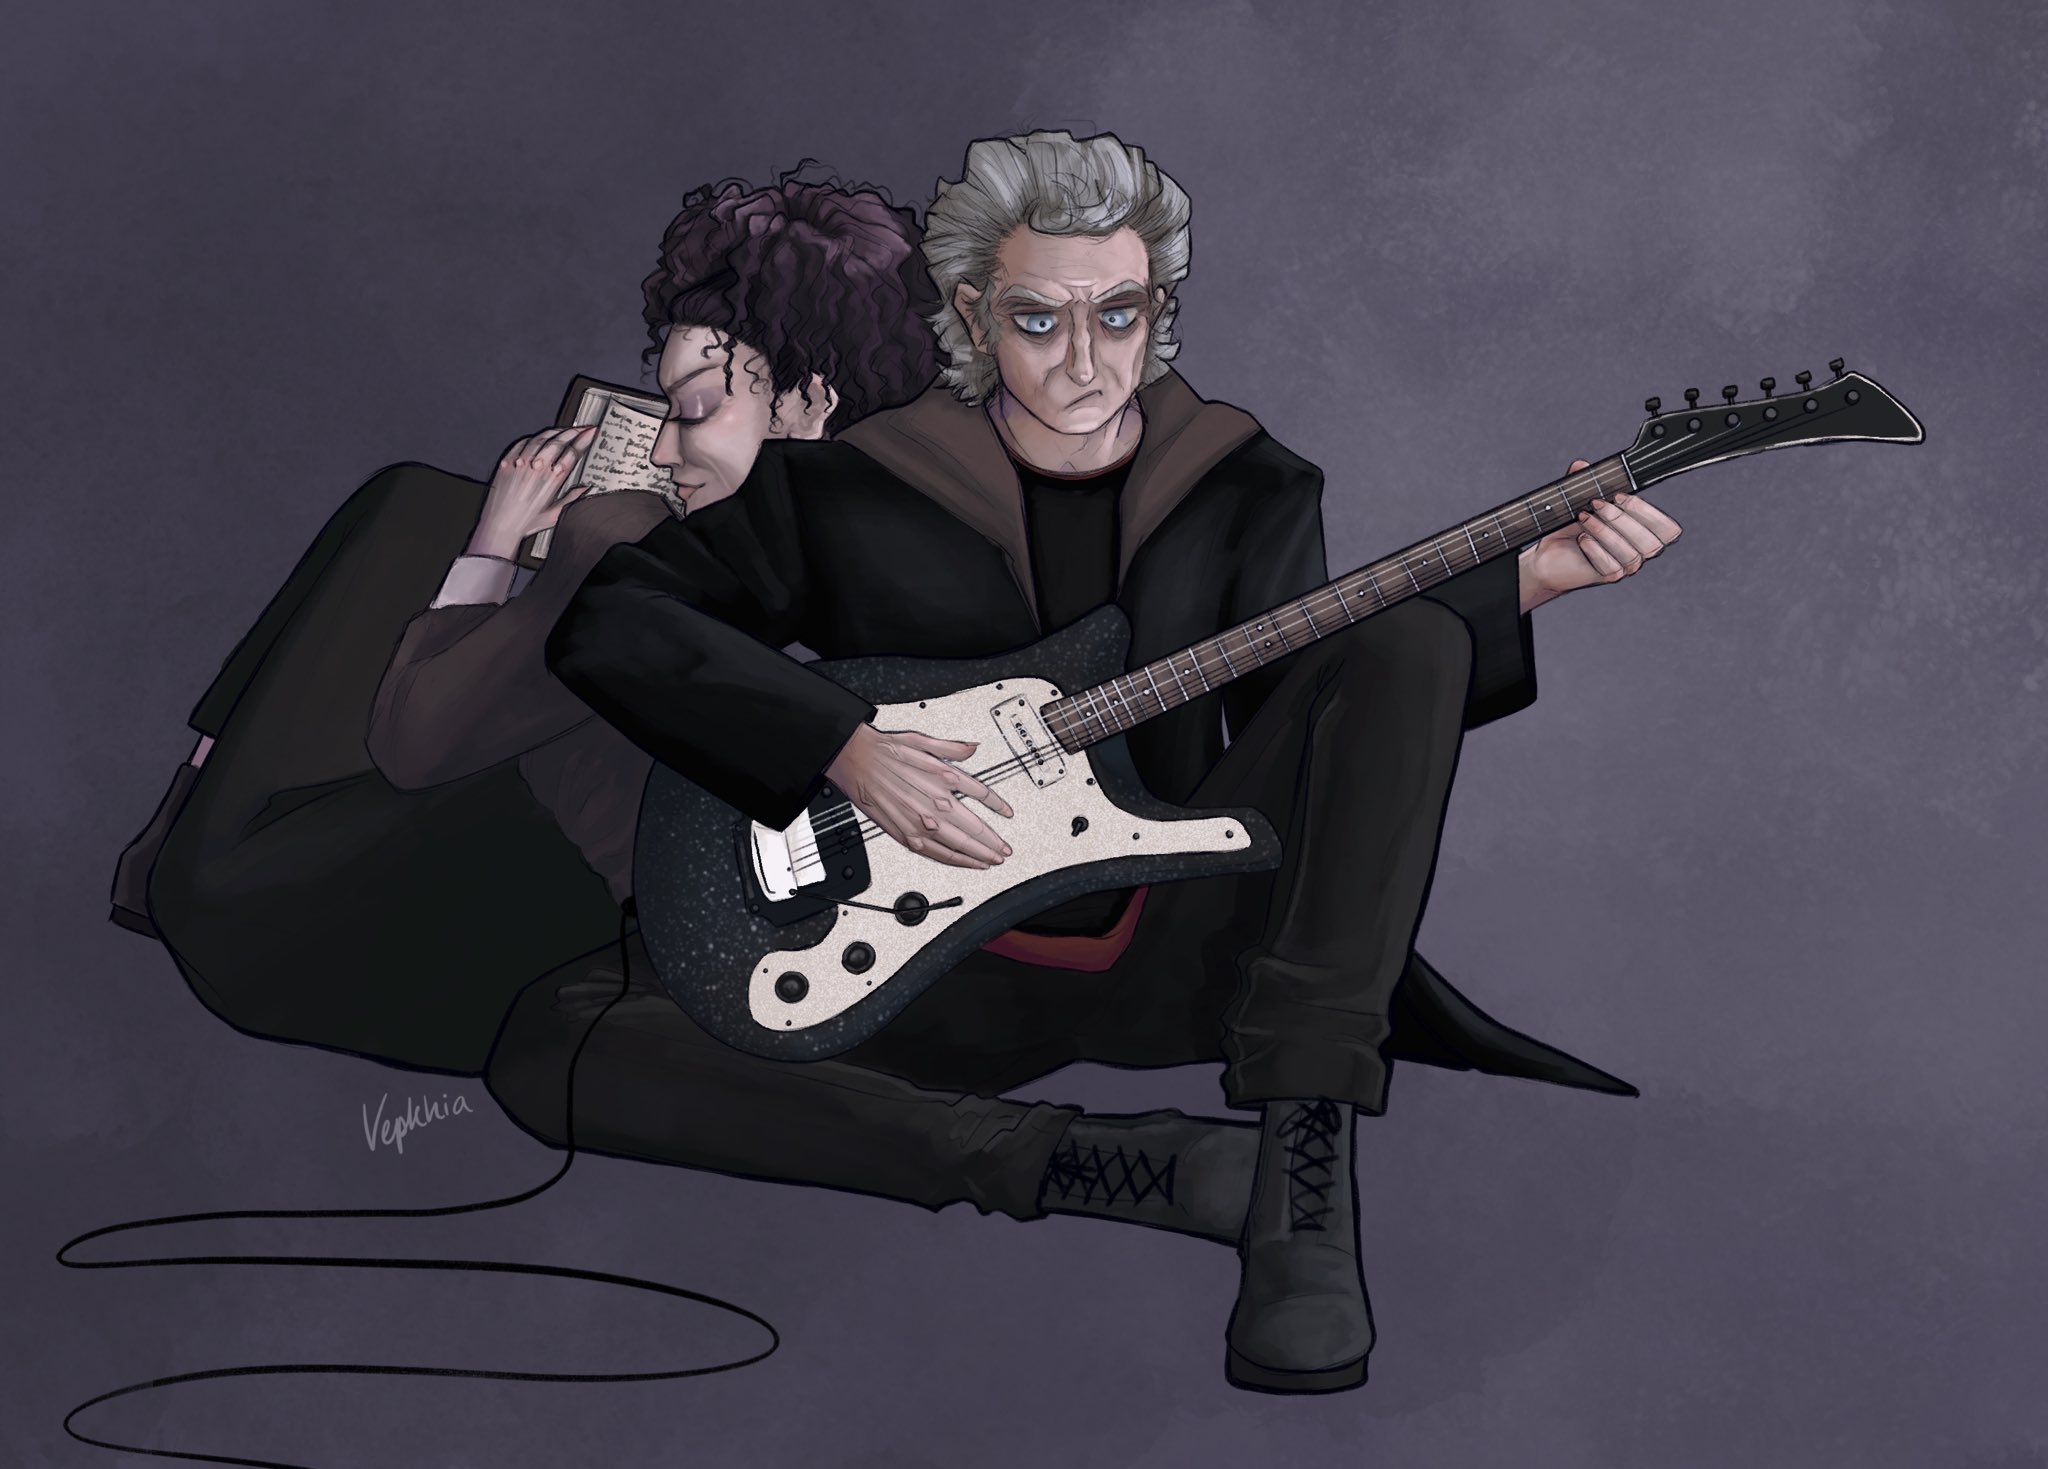 10 June: "No rivalries, just vibes for #FanartFriday 🎸 🖌️: @vepkhiaa"[34]